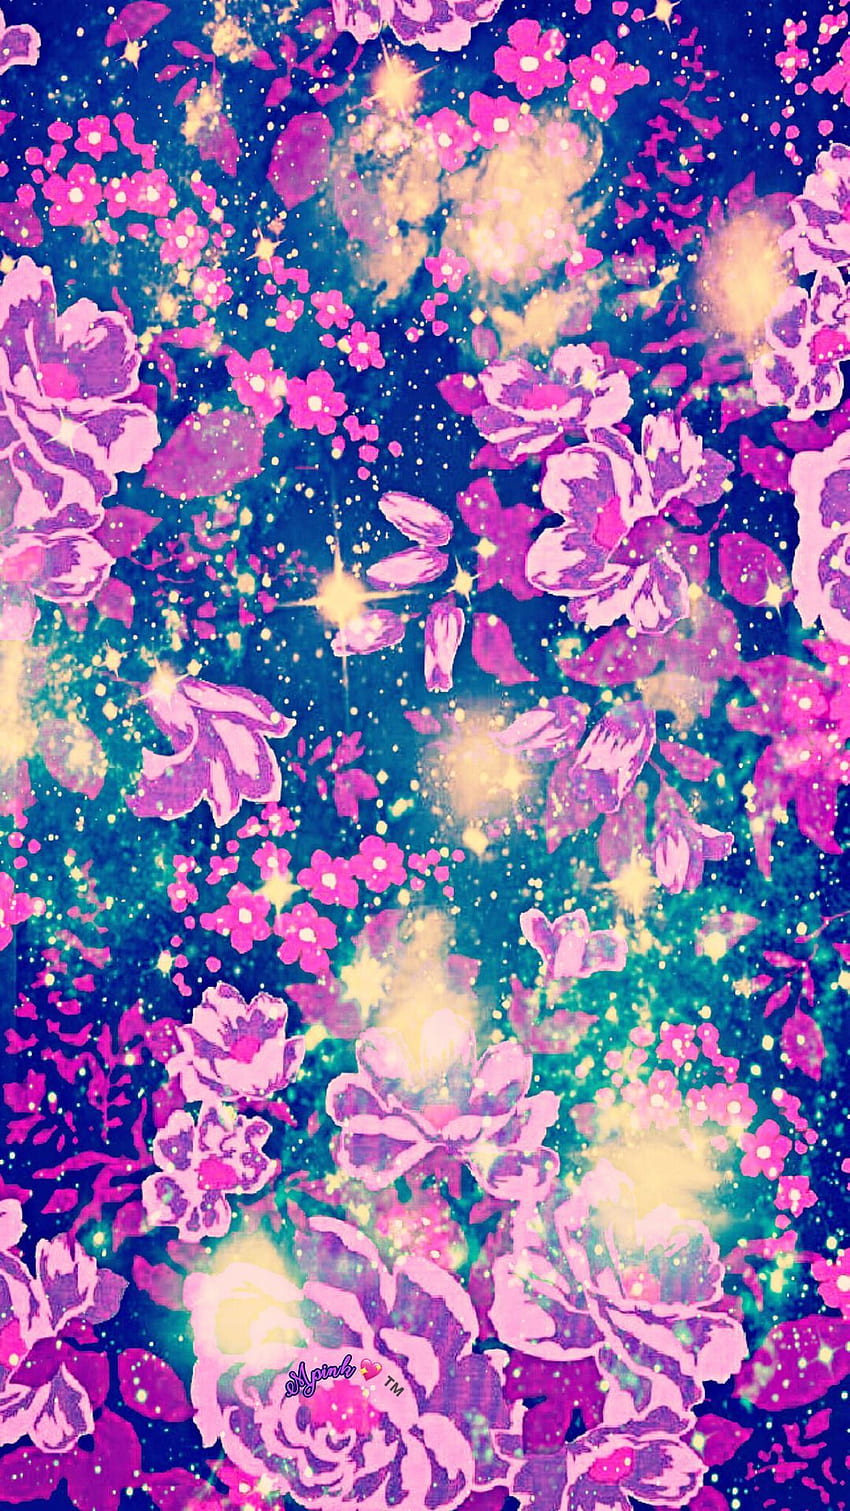 Pin by Kristie on Bling Wallpaper  Louis vuitton iphone wallpaper, Iphone  wallpaper, Pink wallpaper iphone